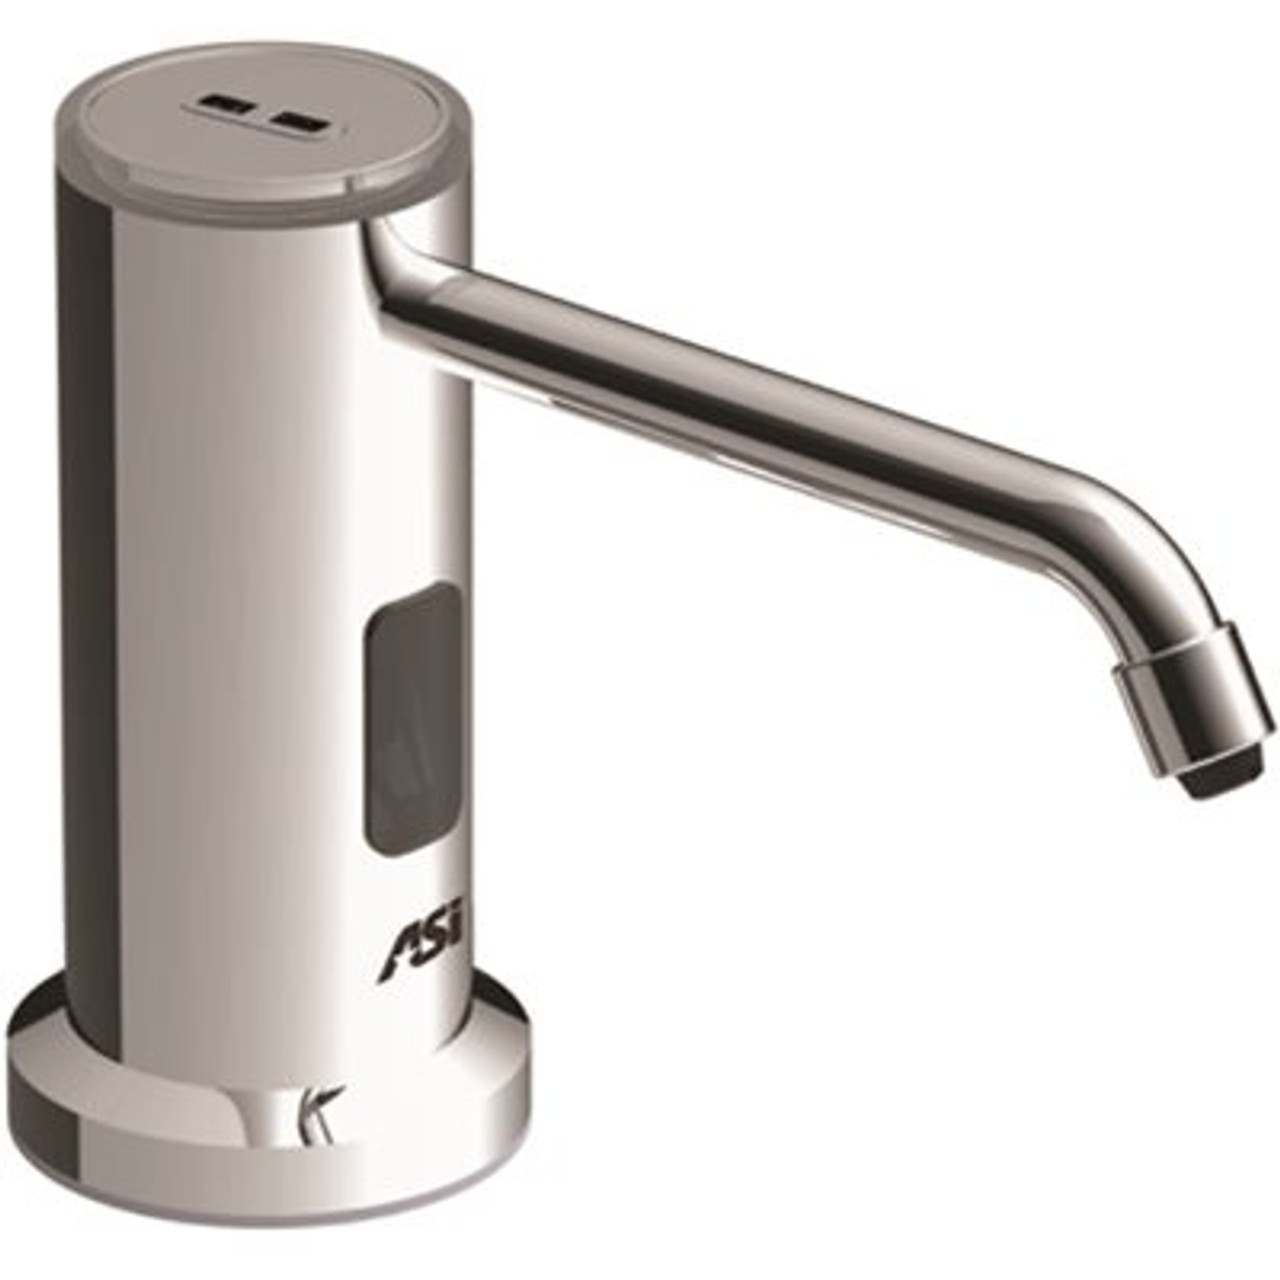 Countertop 50.7 oz. Automatic (AC) Top Fill Liquid Soap Dispenser in Stainless Steel